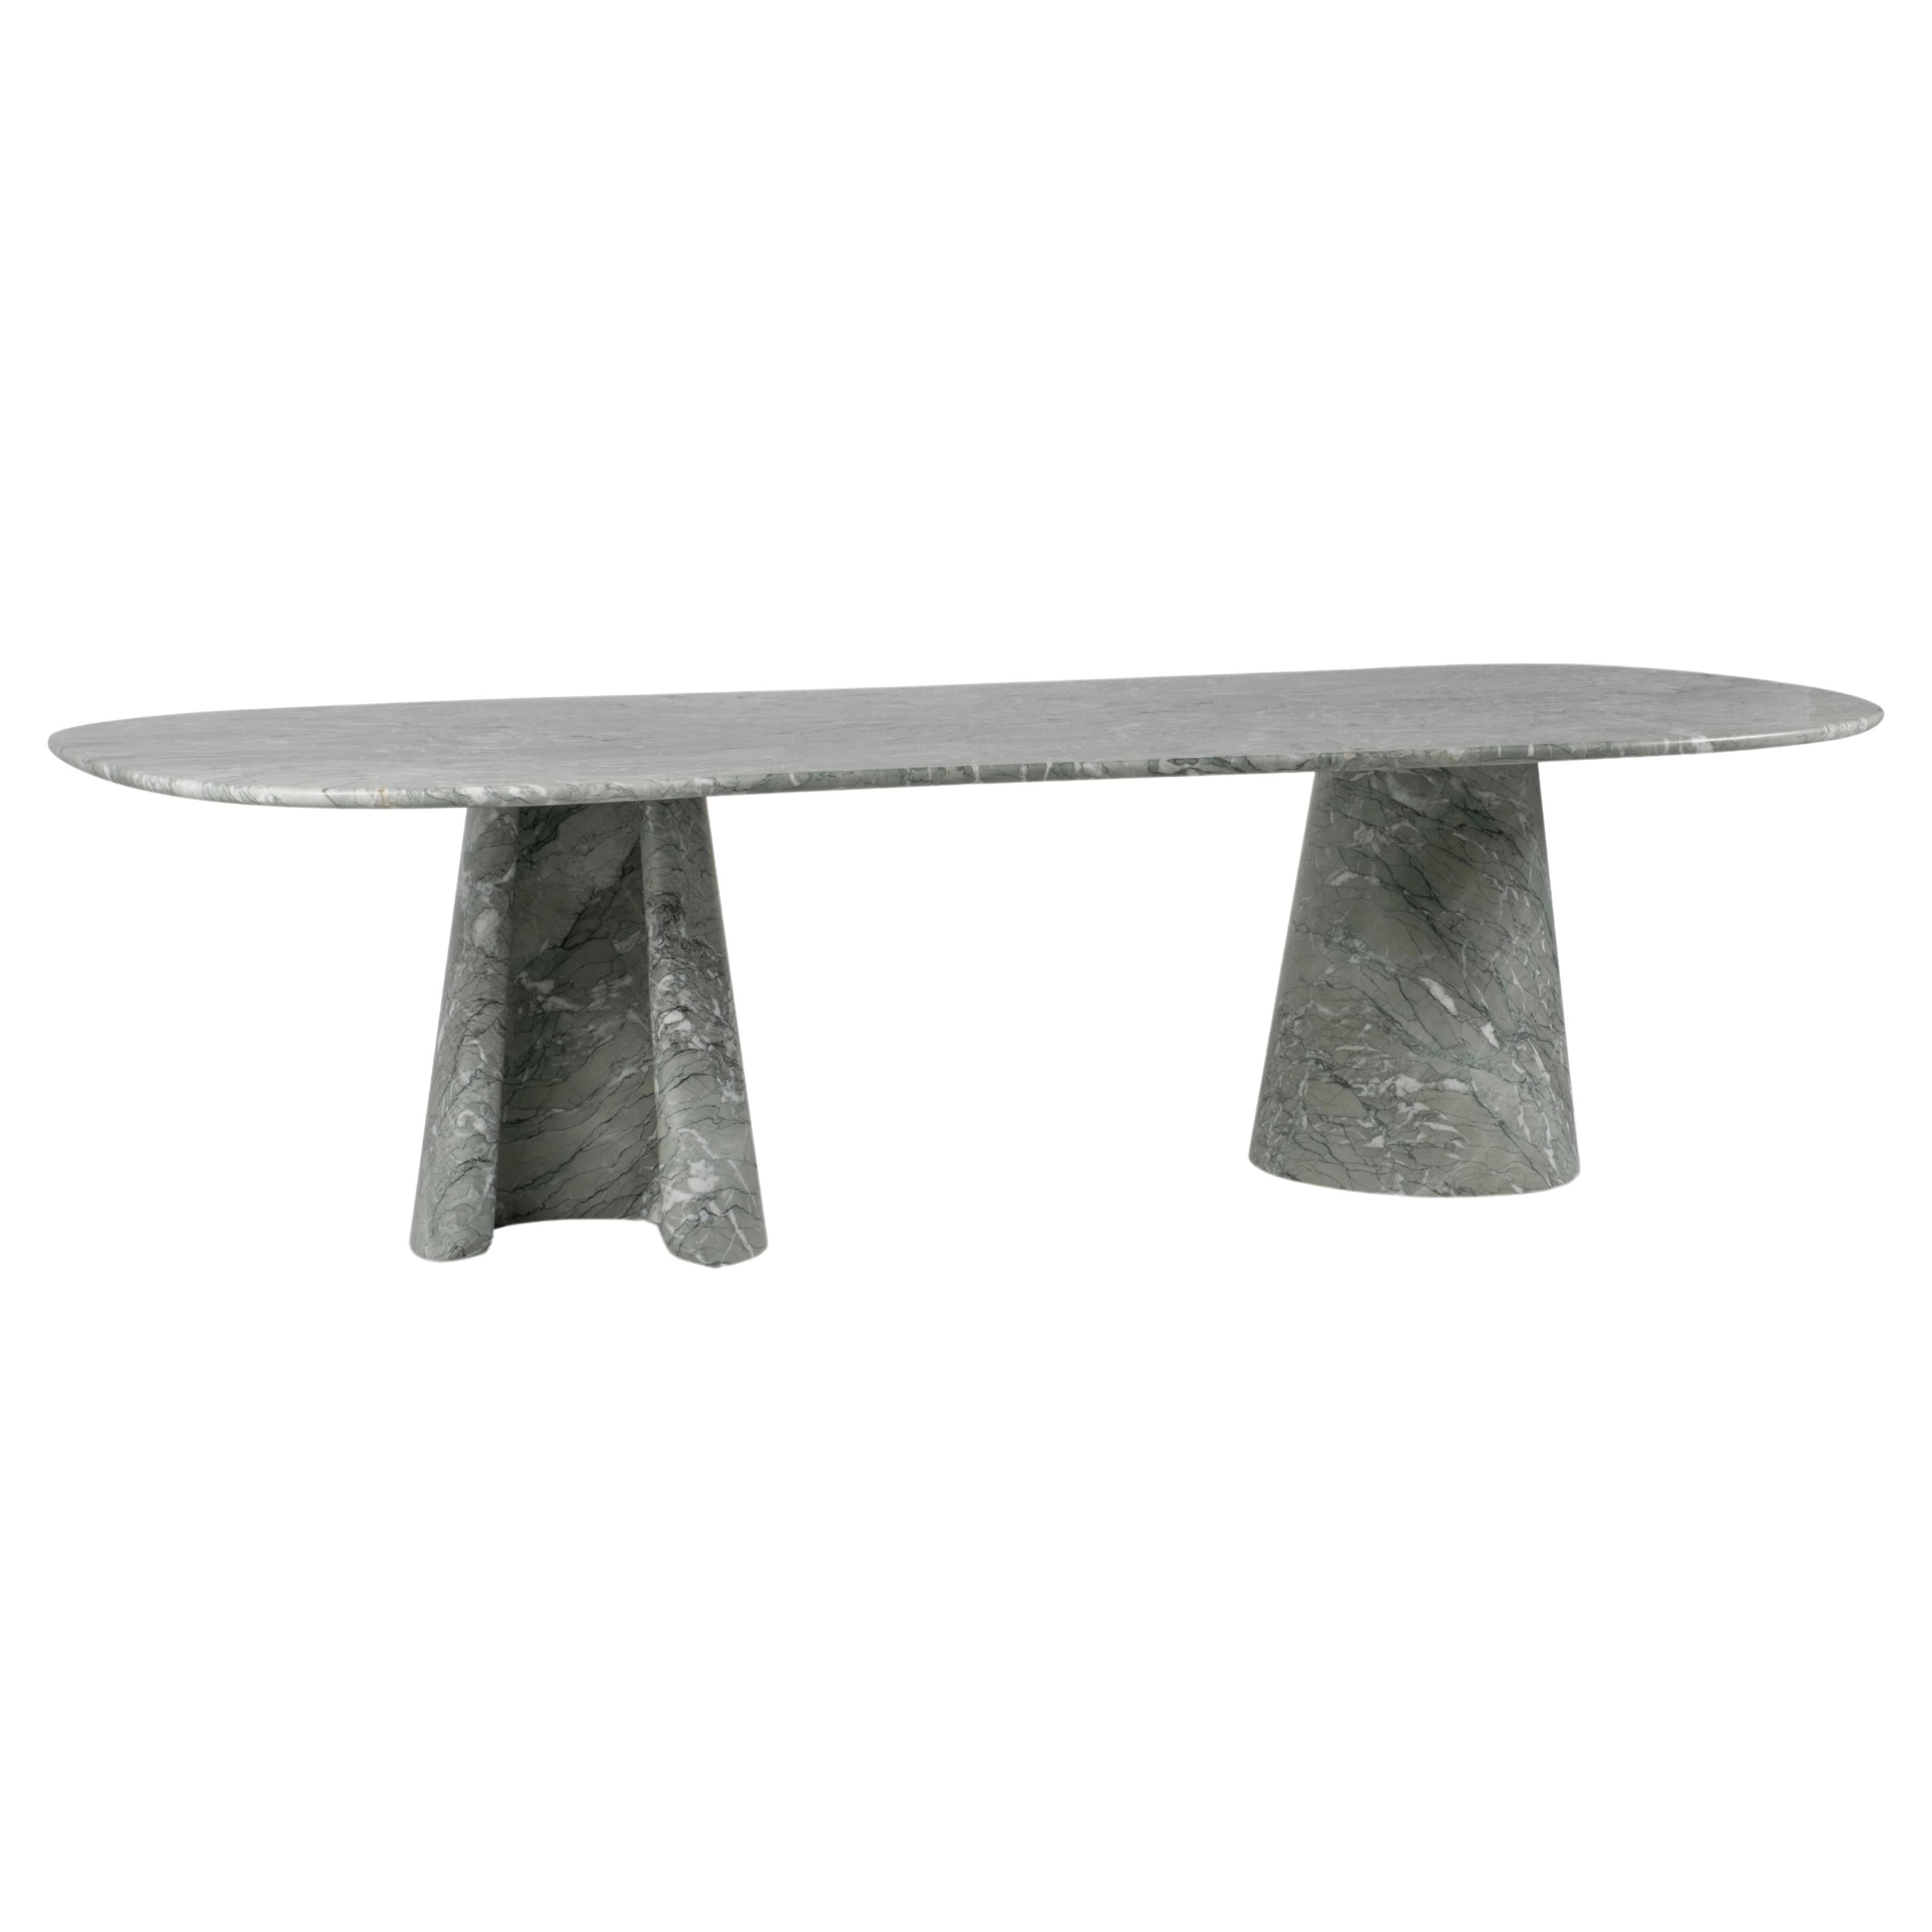 Modern In-Side Marble Dining Table, 10 Seat, Handmade in Portugal by Greenapple For Sale